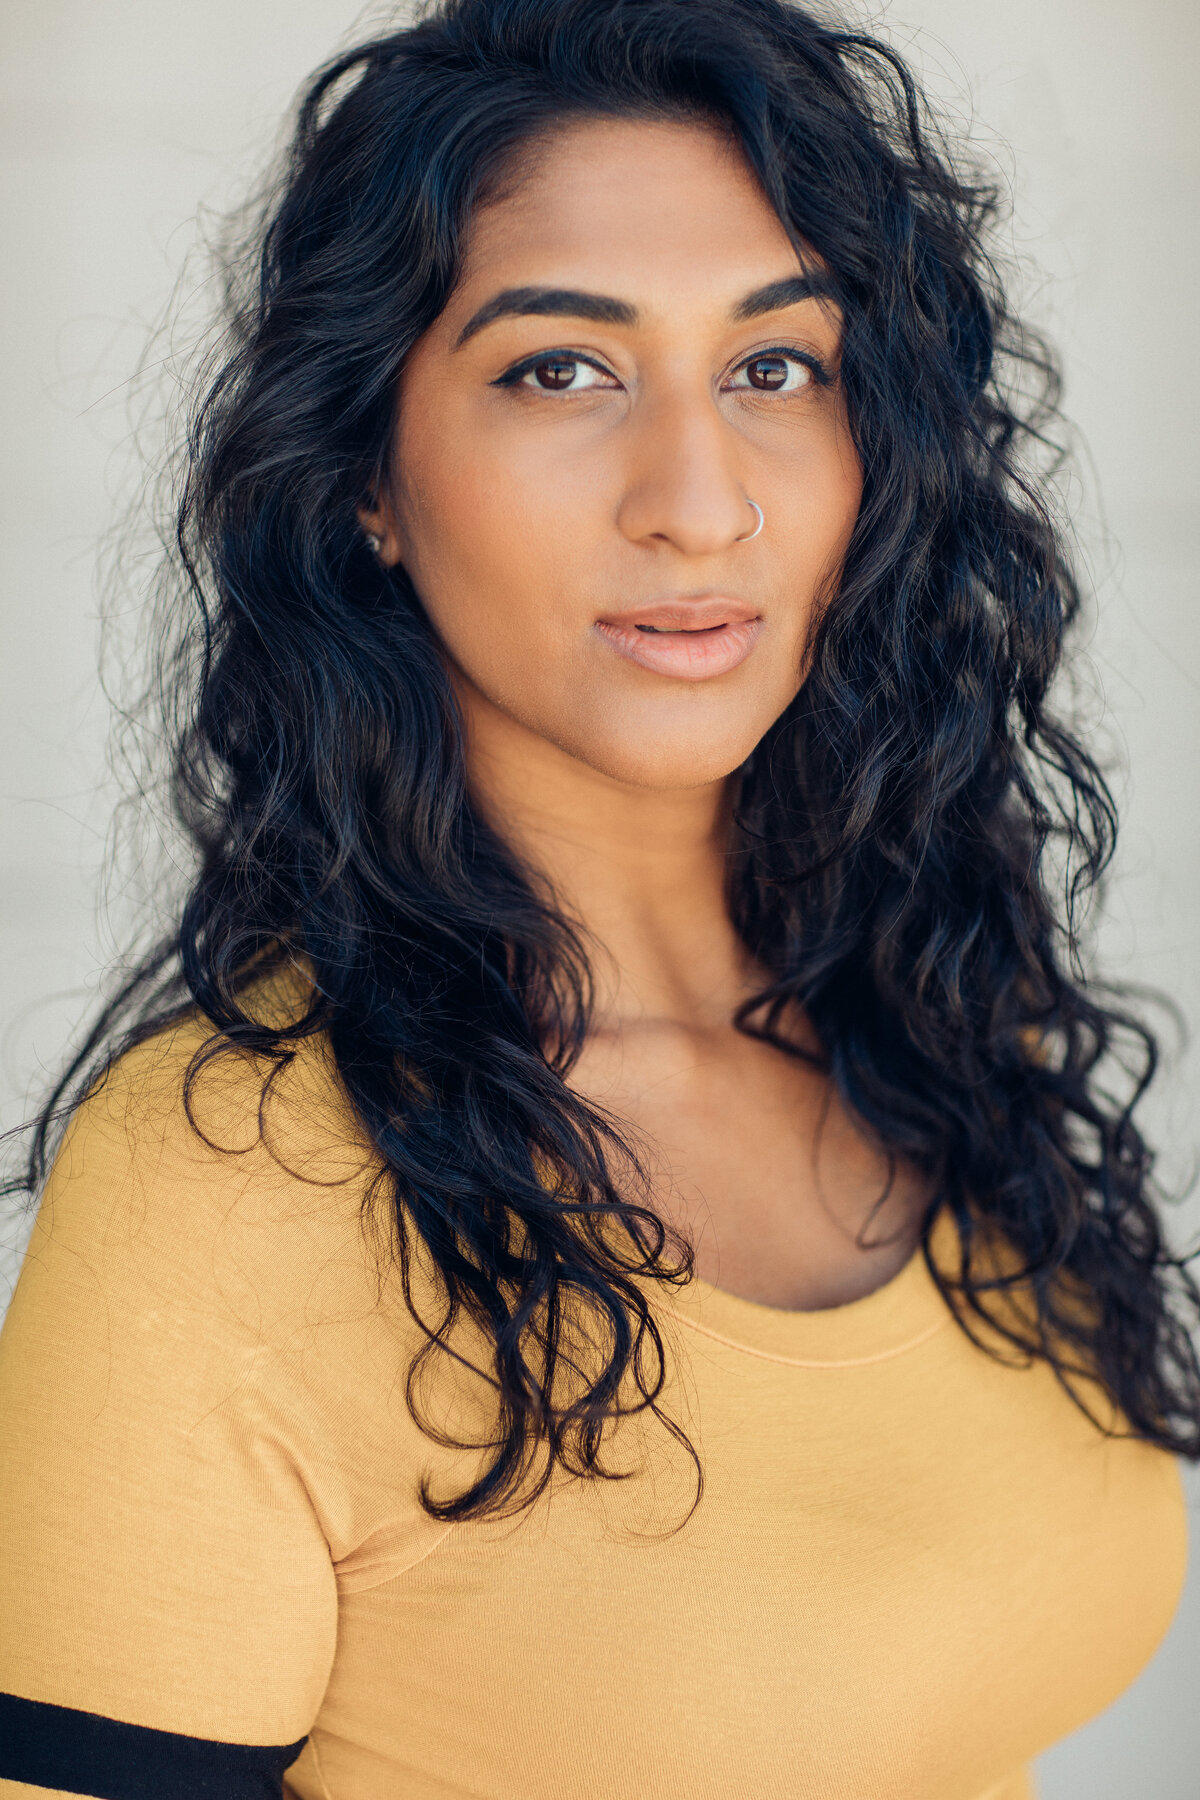 Headshot Photograph Of Young Woman In Yellow Shirt Los Angeles